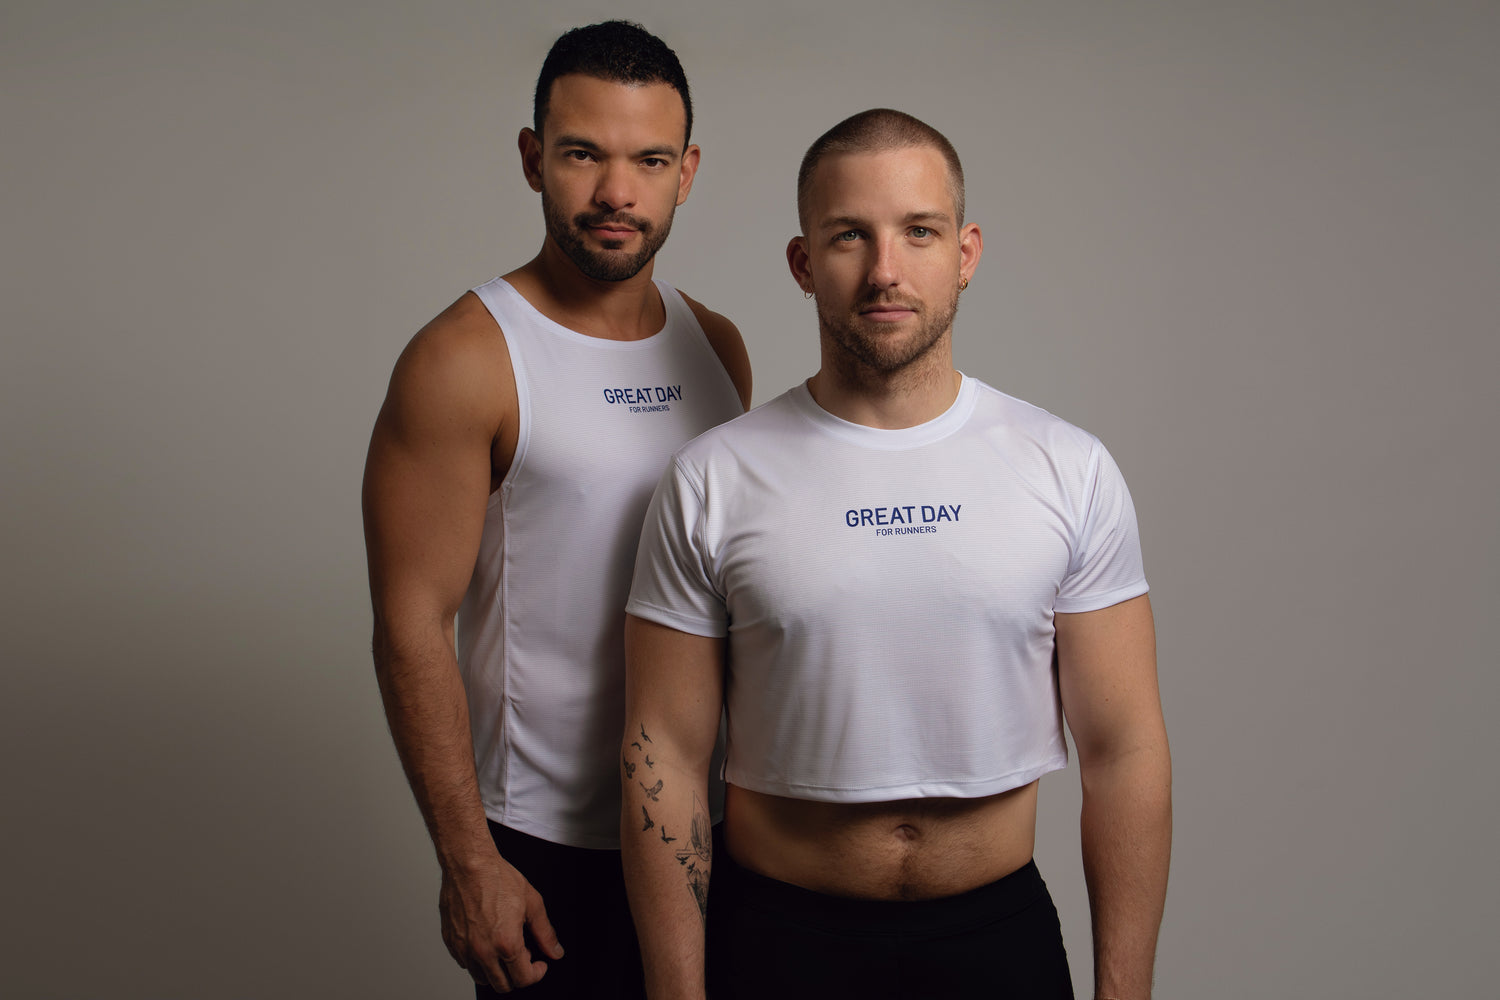 Two men in white crop tops standing against a grey background, both with text "great day" on his shirt, looking confidently at the camera.